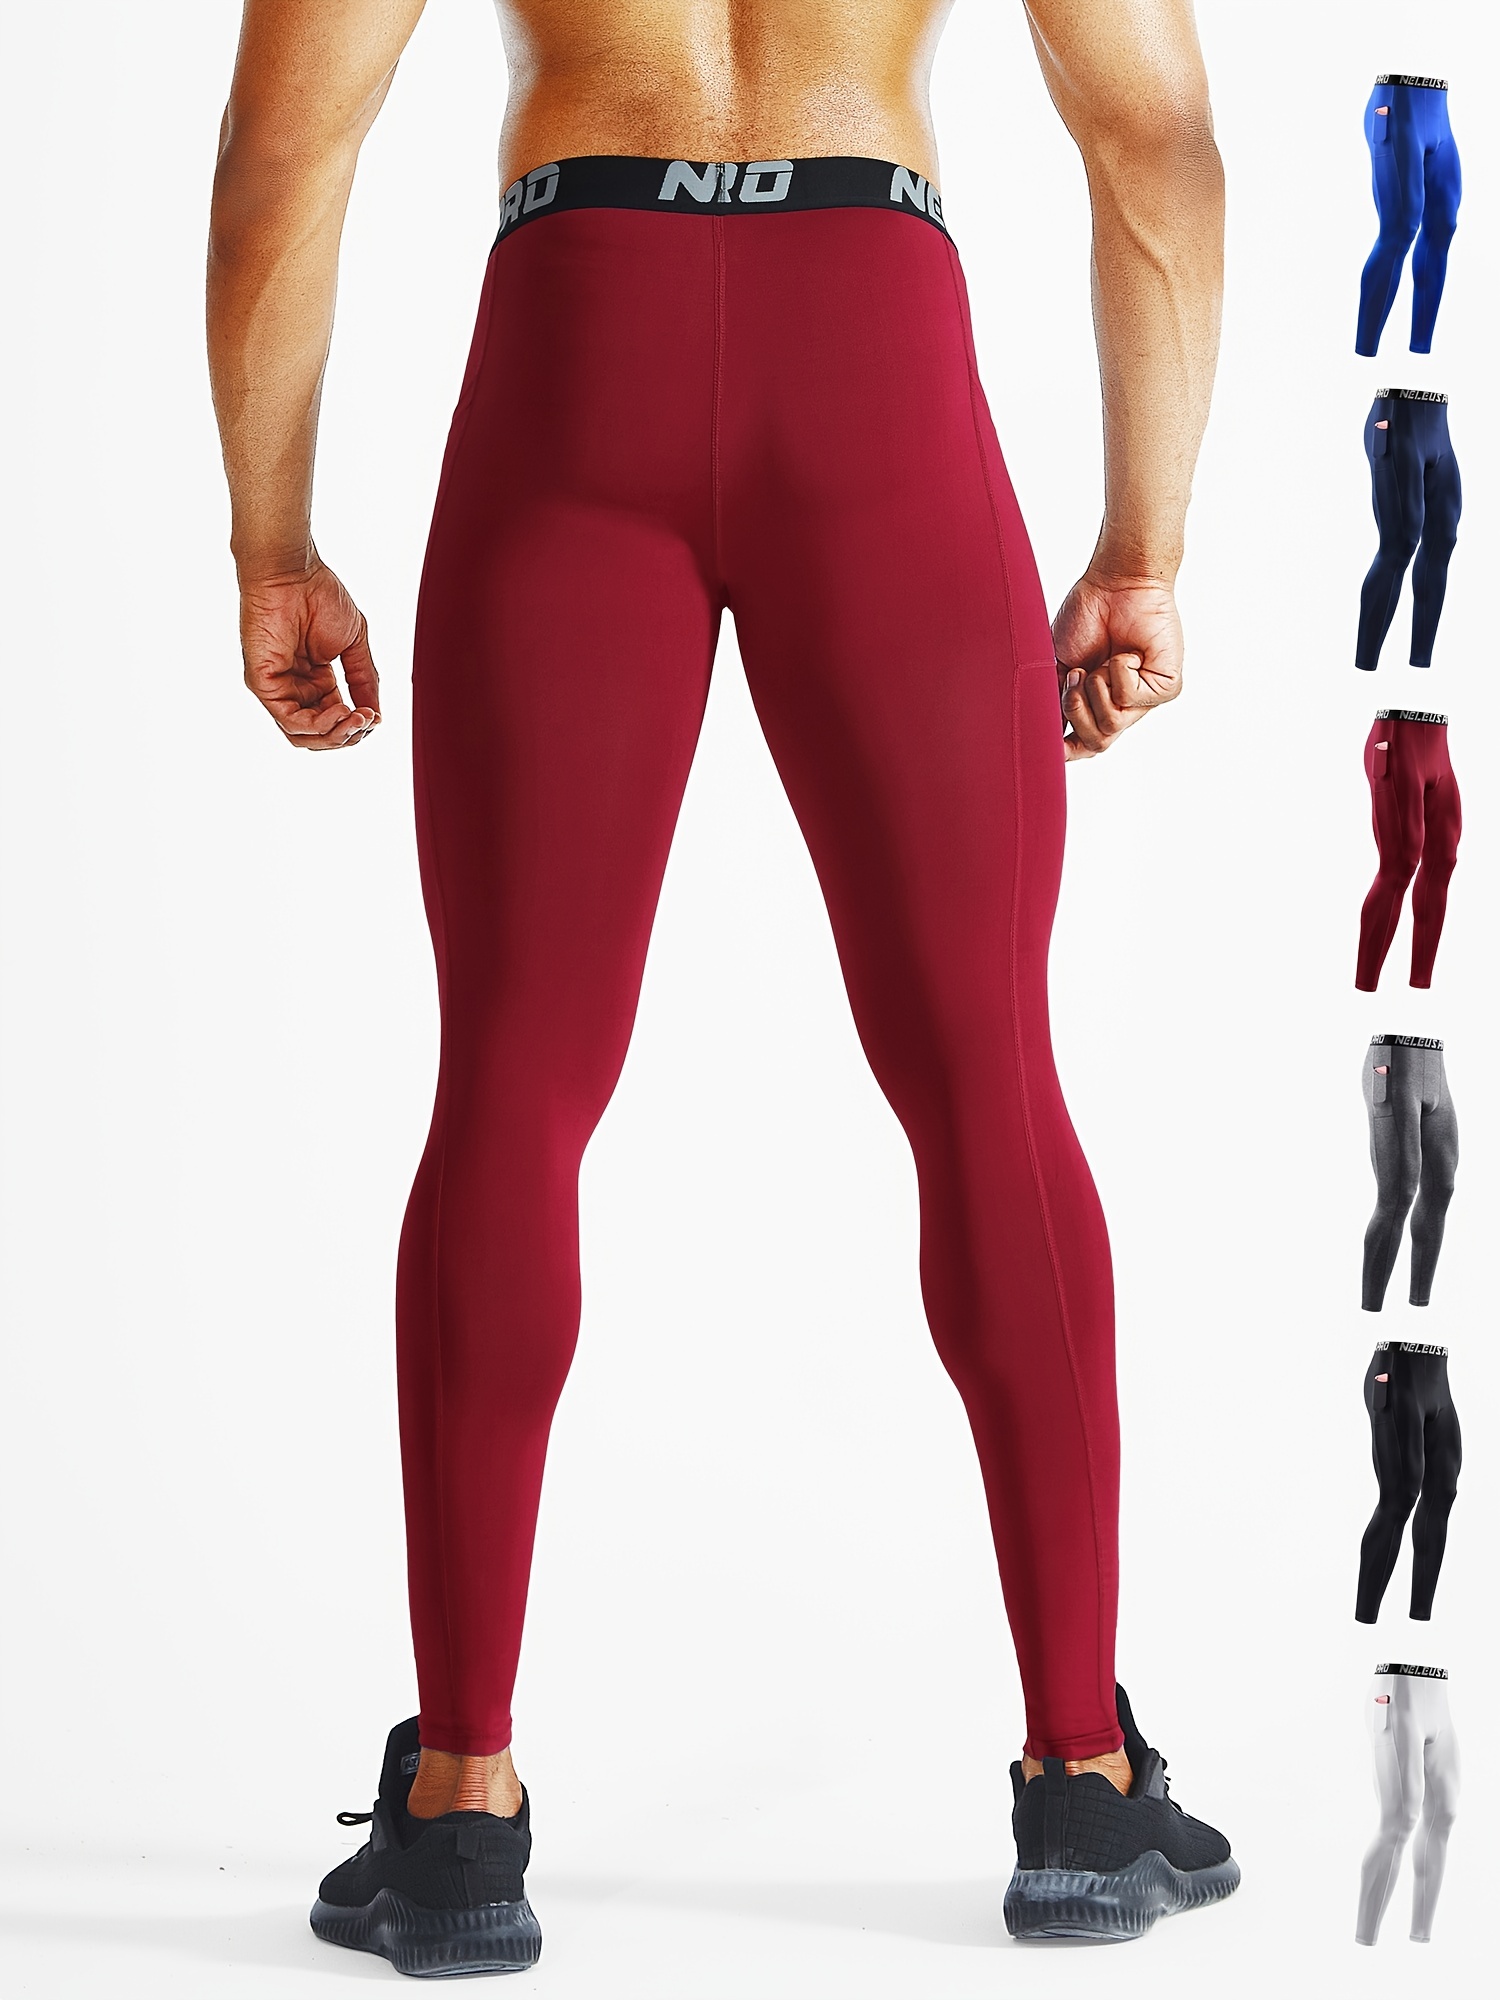 Men's Cotton Compression Leggings Cool Dry Baselayer Tights